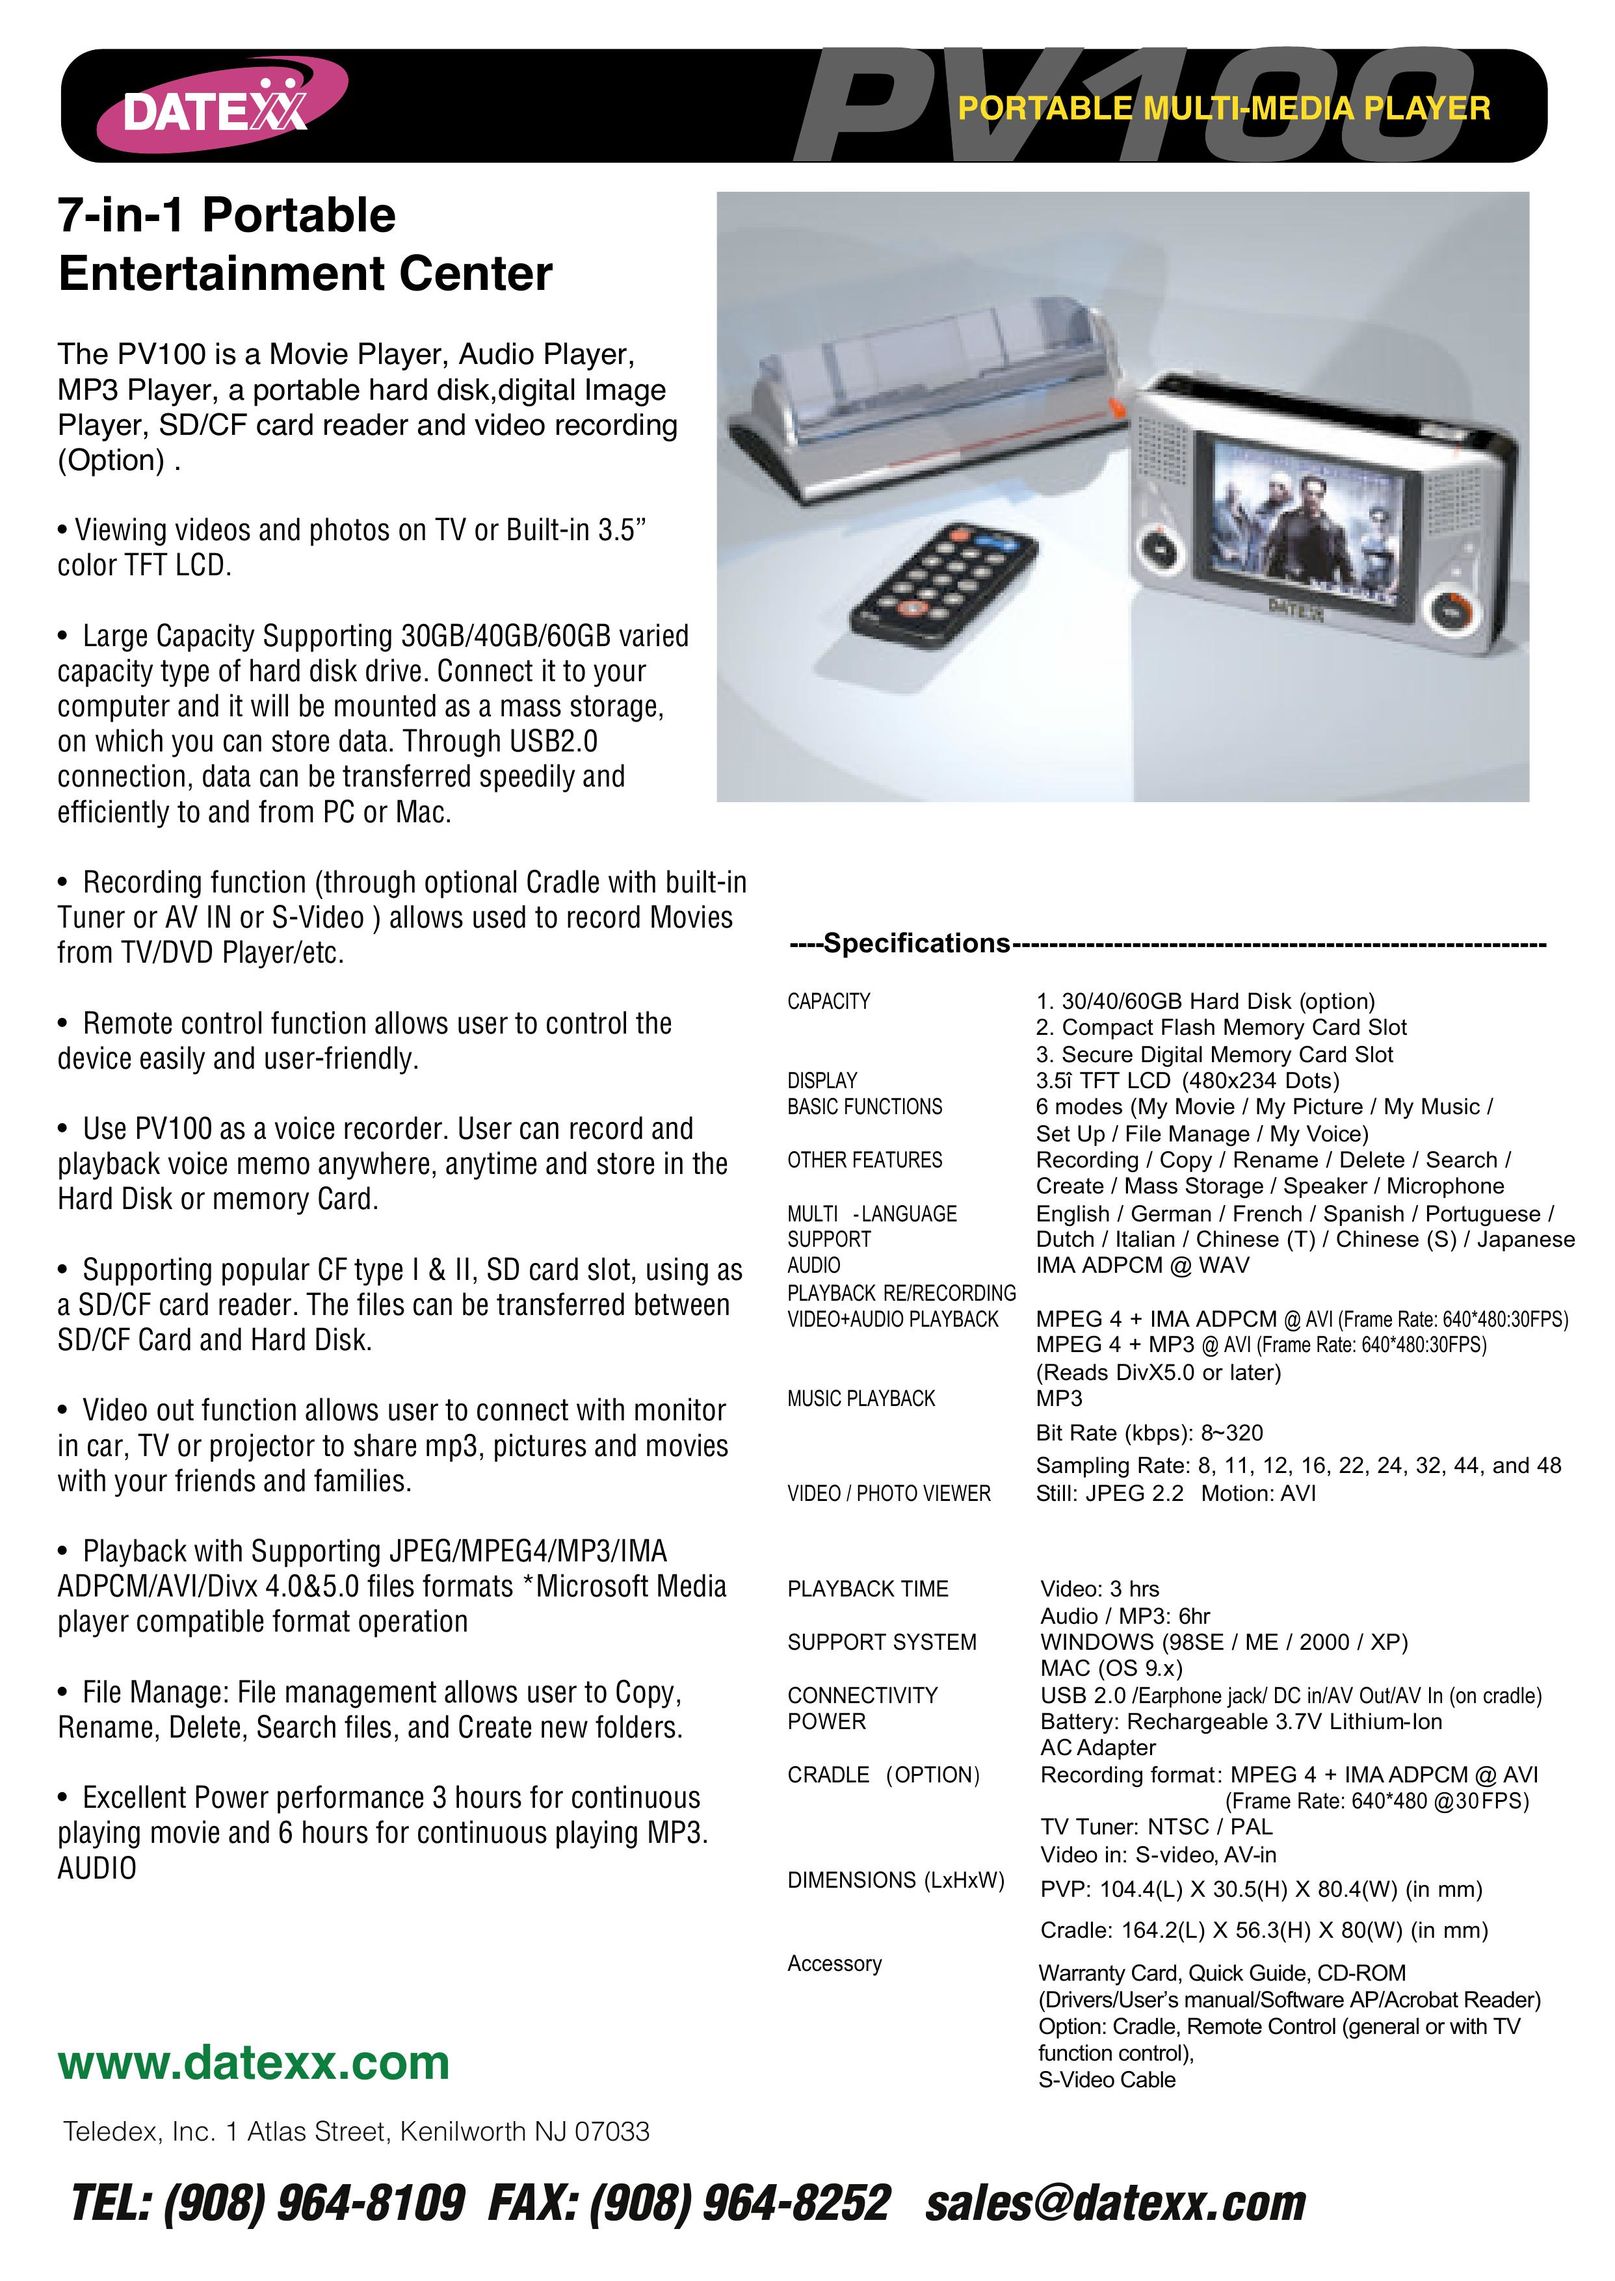 Datexx PV100 Home Theater System User Manual